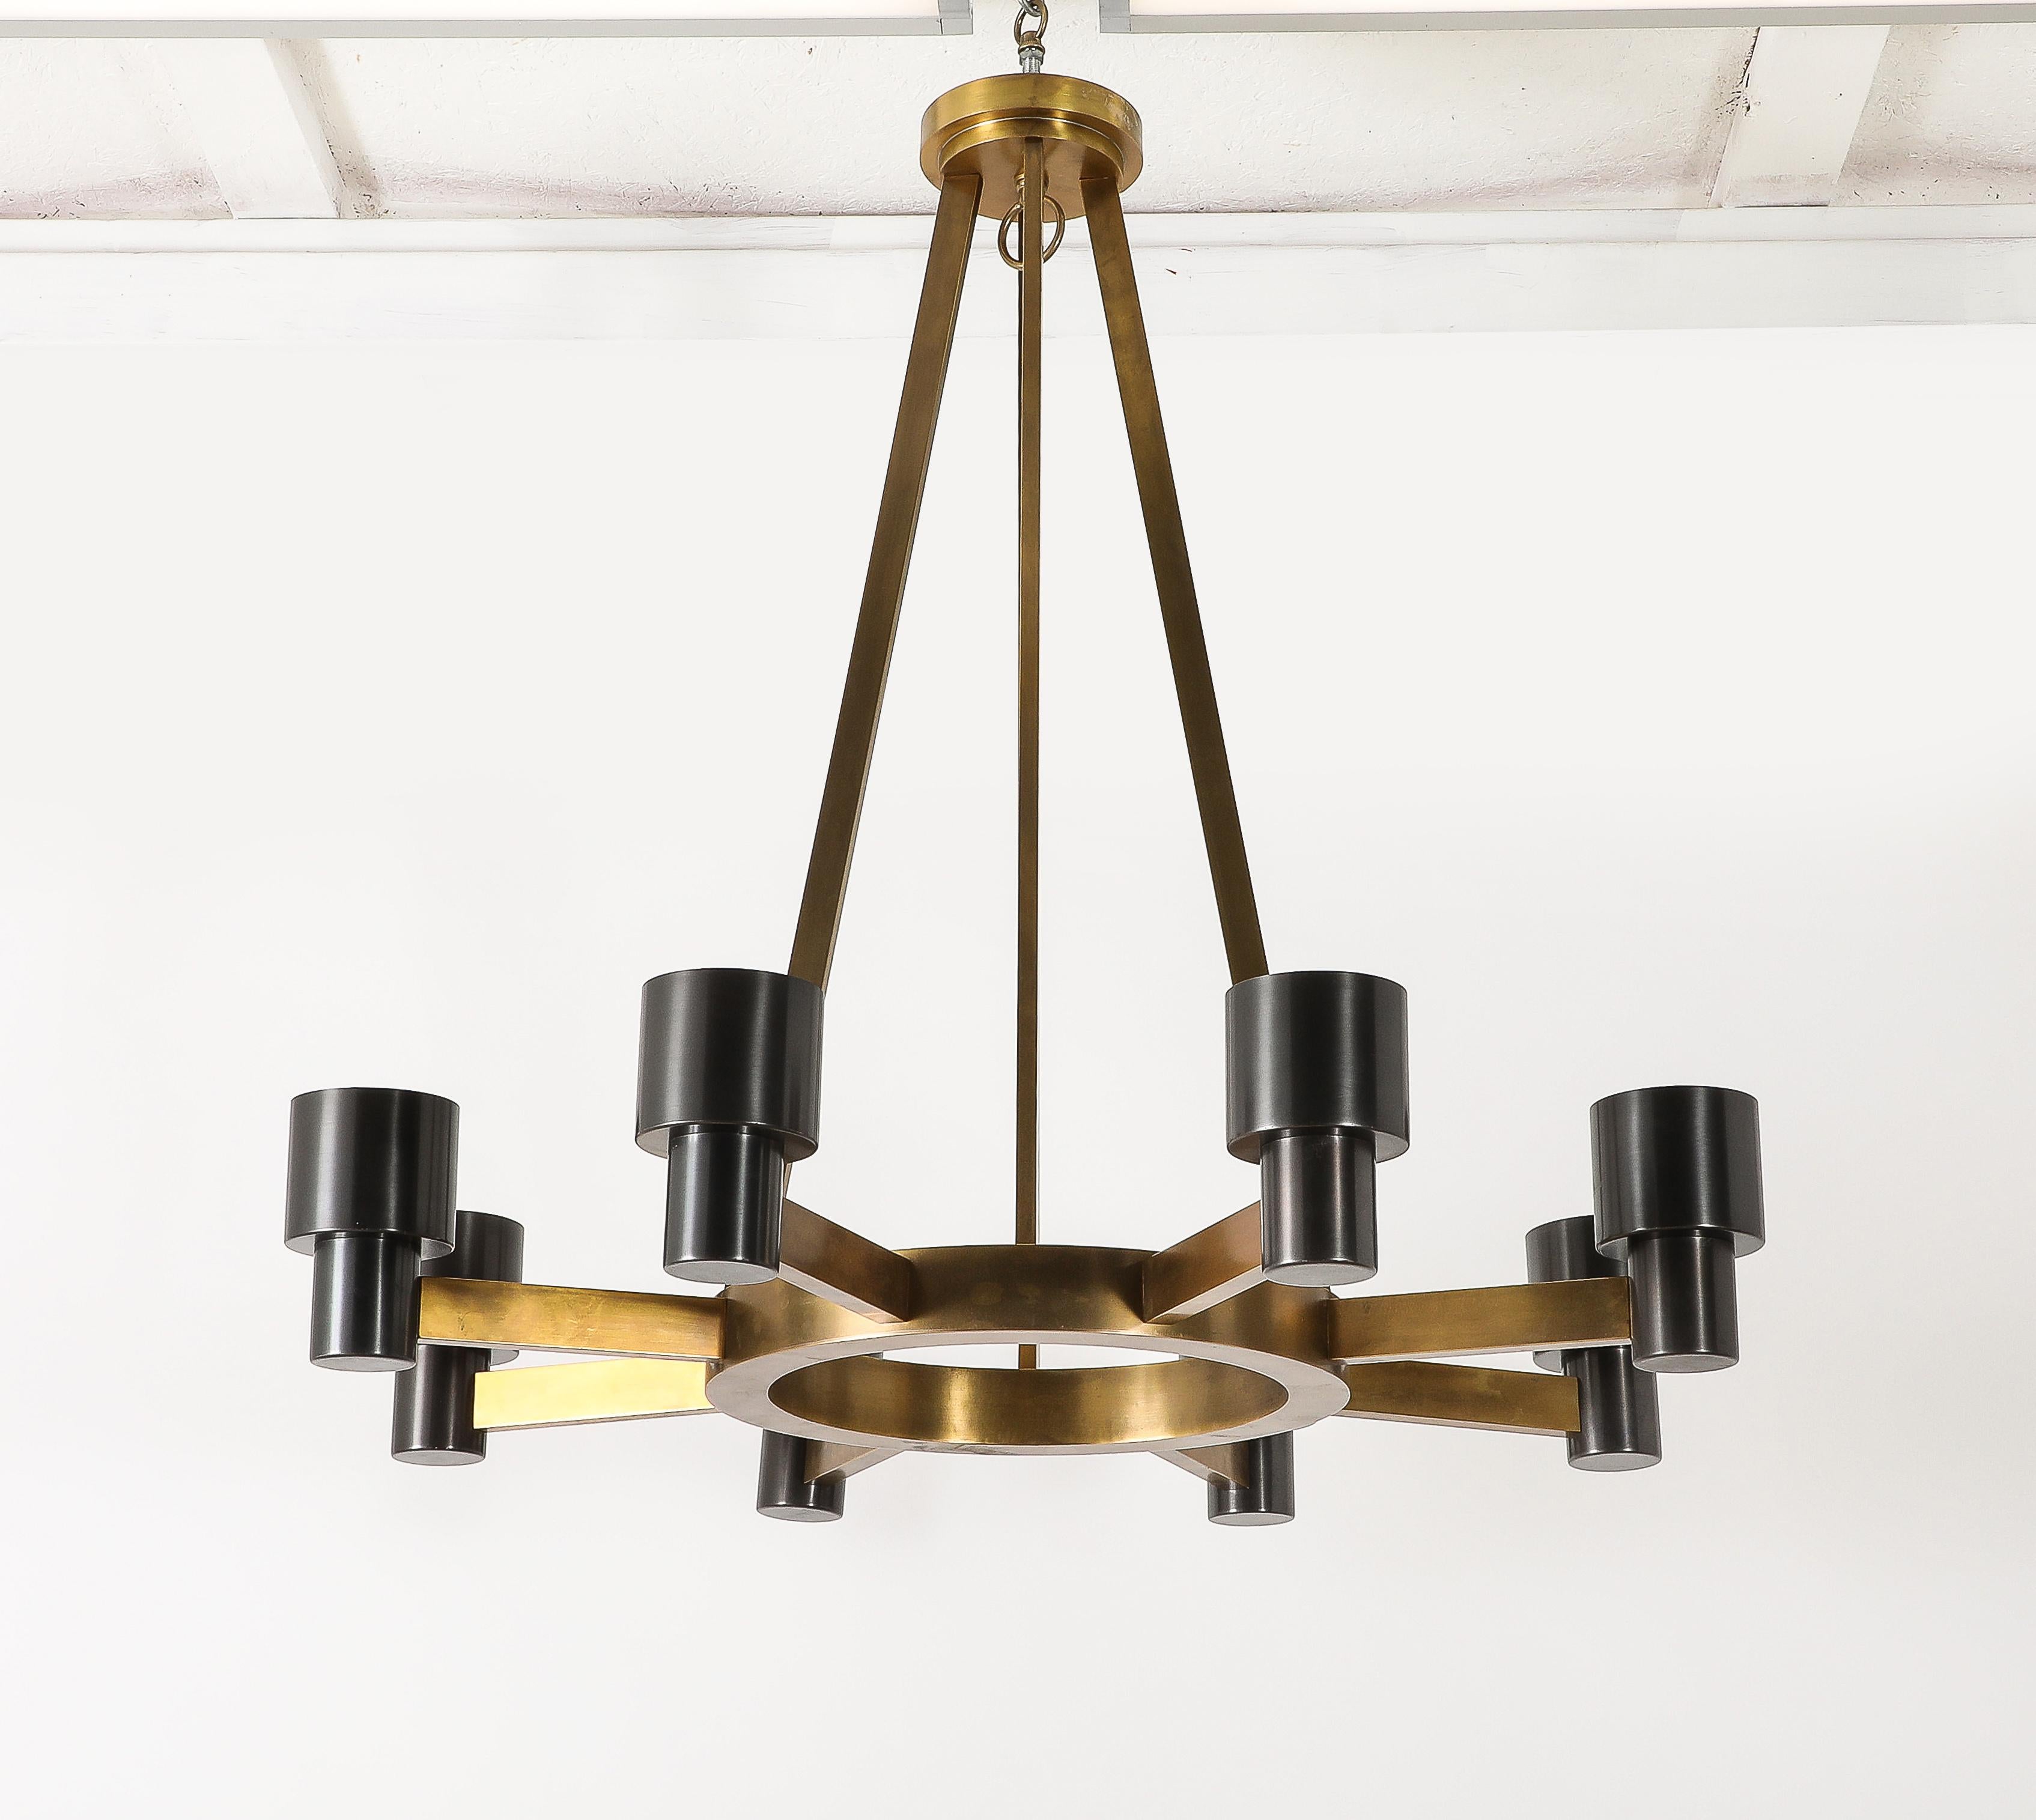 Mixed Metal Brutalist Mid-Century Chandelier Custom Reproduction, USA 2018 For Sale 4